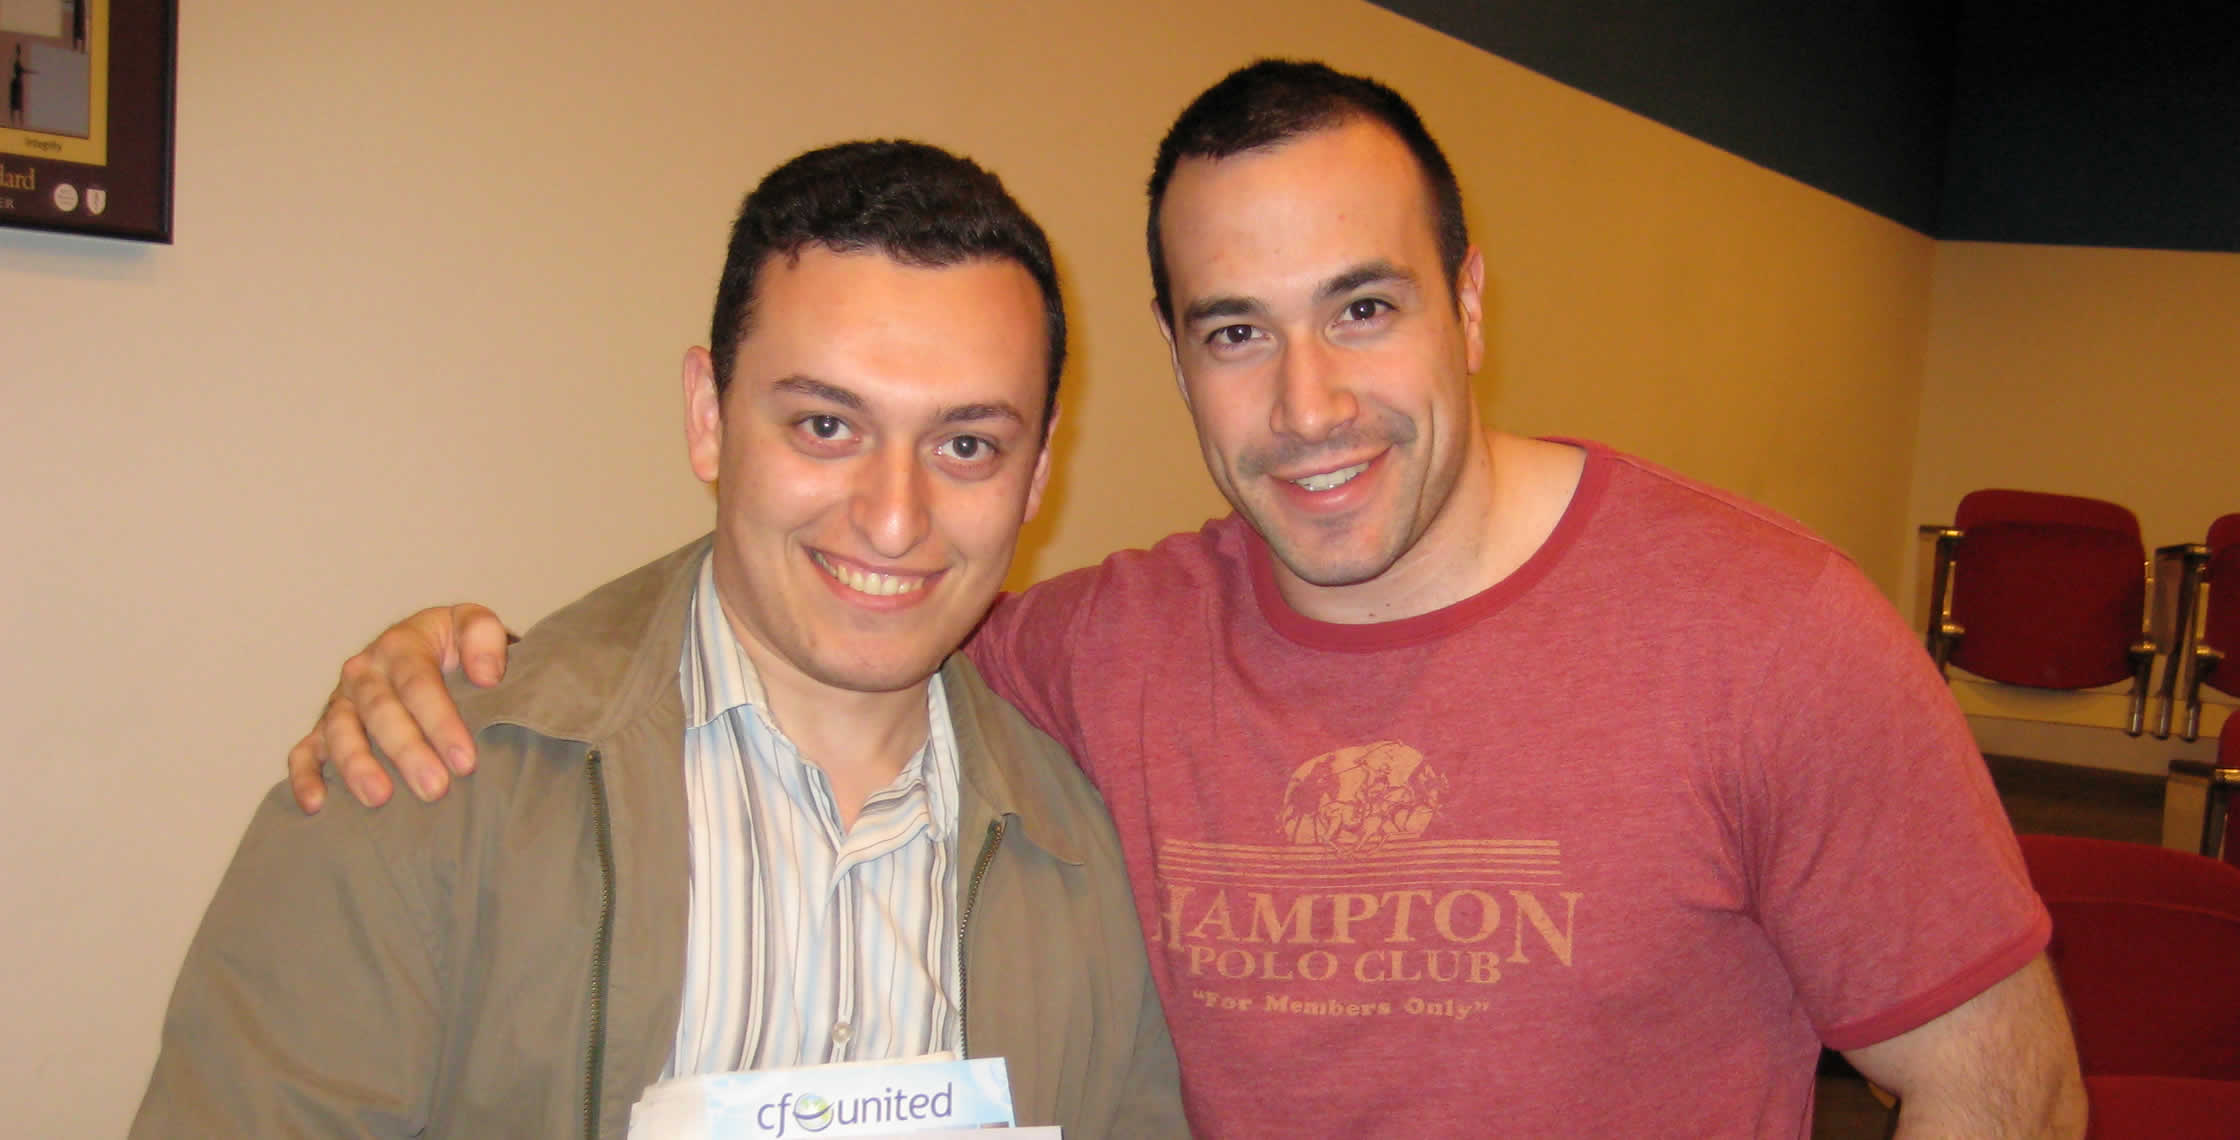 Ben Nadel at the New York ColdFusion User Group (Apr. 2008) with: Dmitriy Goltseker